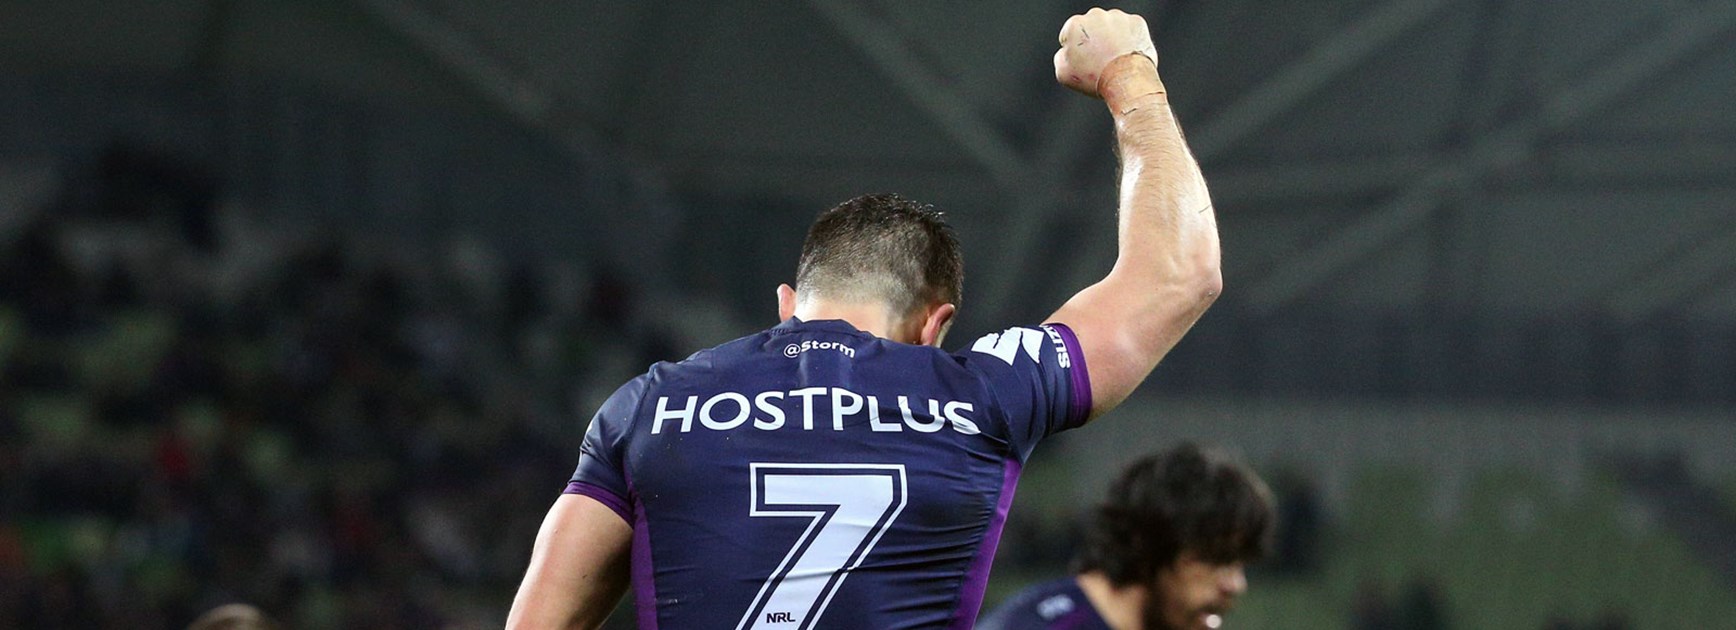 Storm halfback Cooper Cronk against the Cowboys in Finals Week 1.